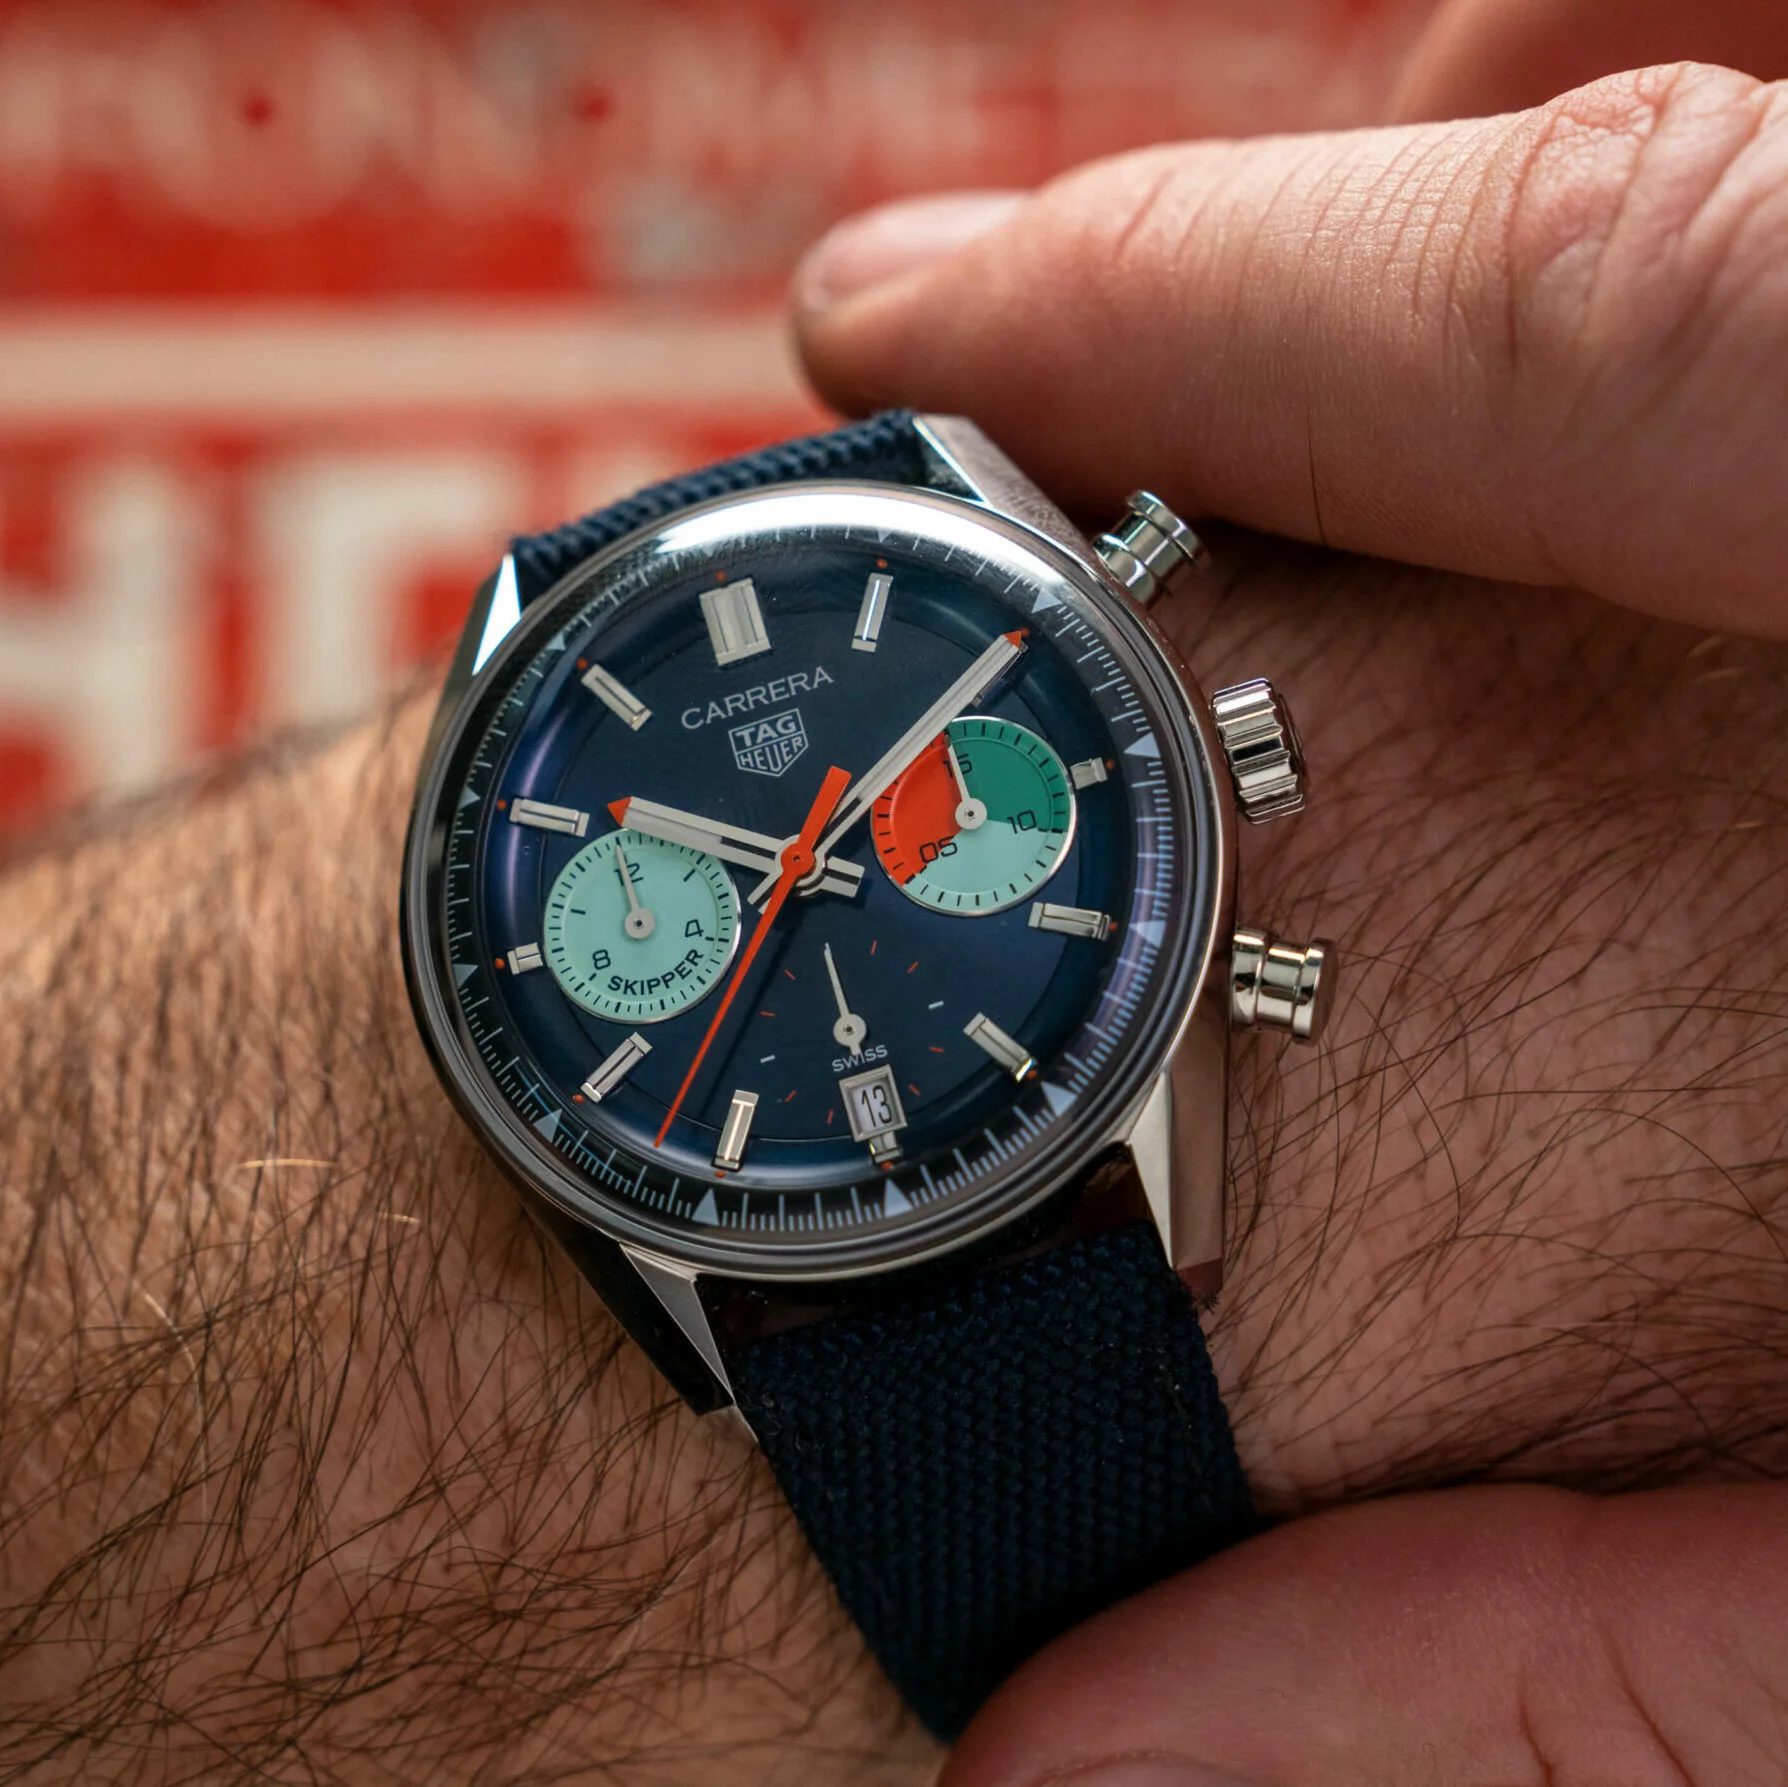 Watches and Wonders 2023: TAG Heuer Celebrates Carrera